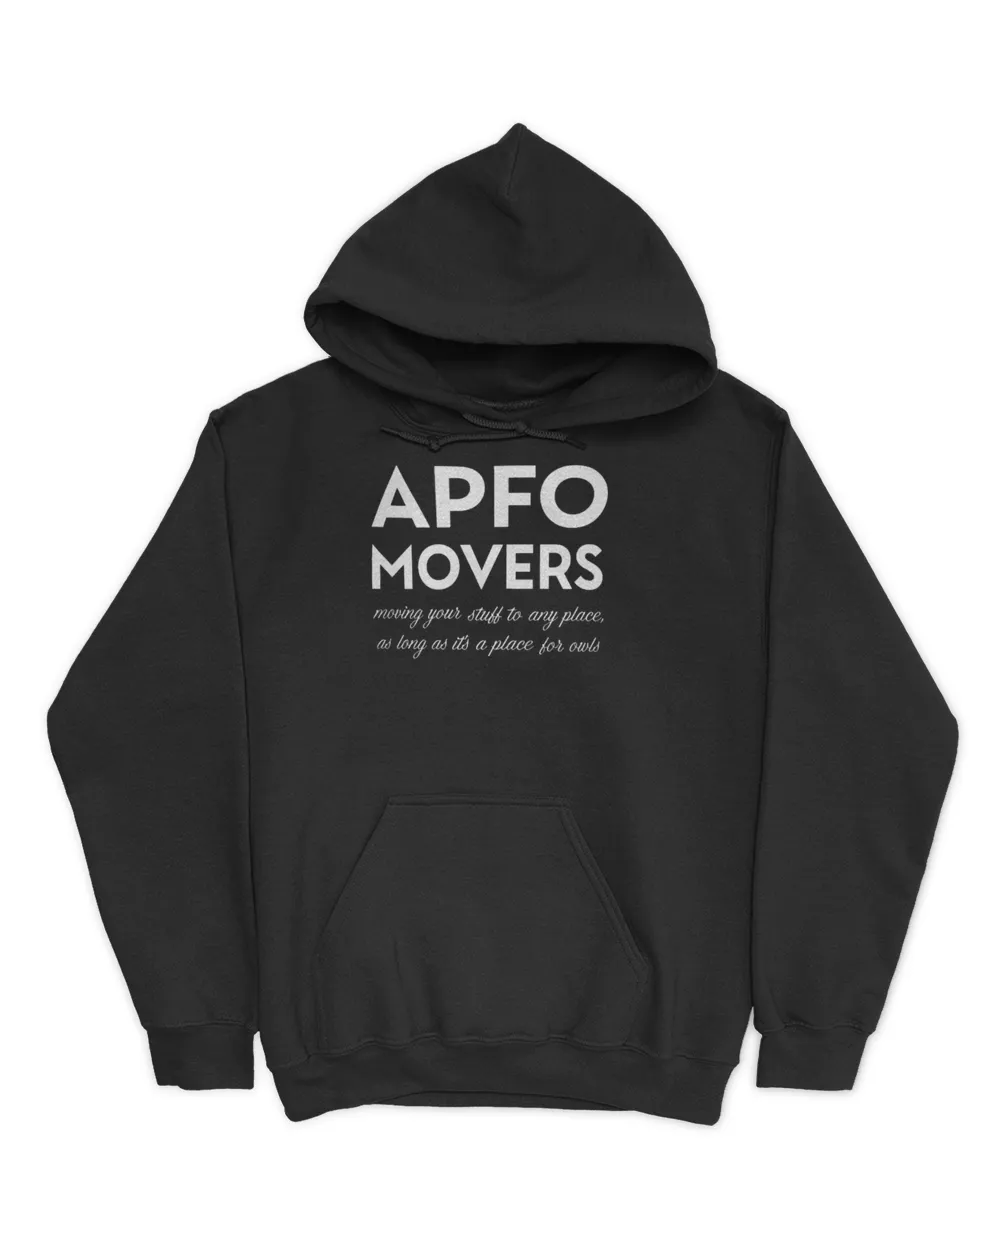 Apfo movers moving your stuff to any place T-shirt